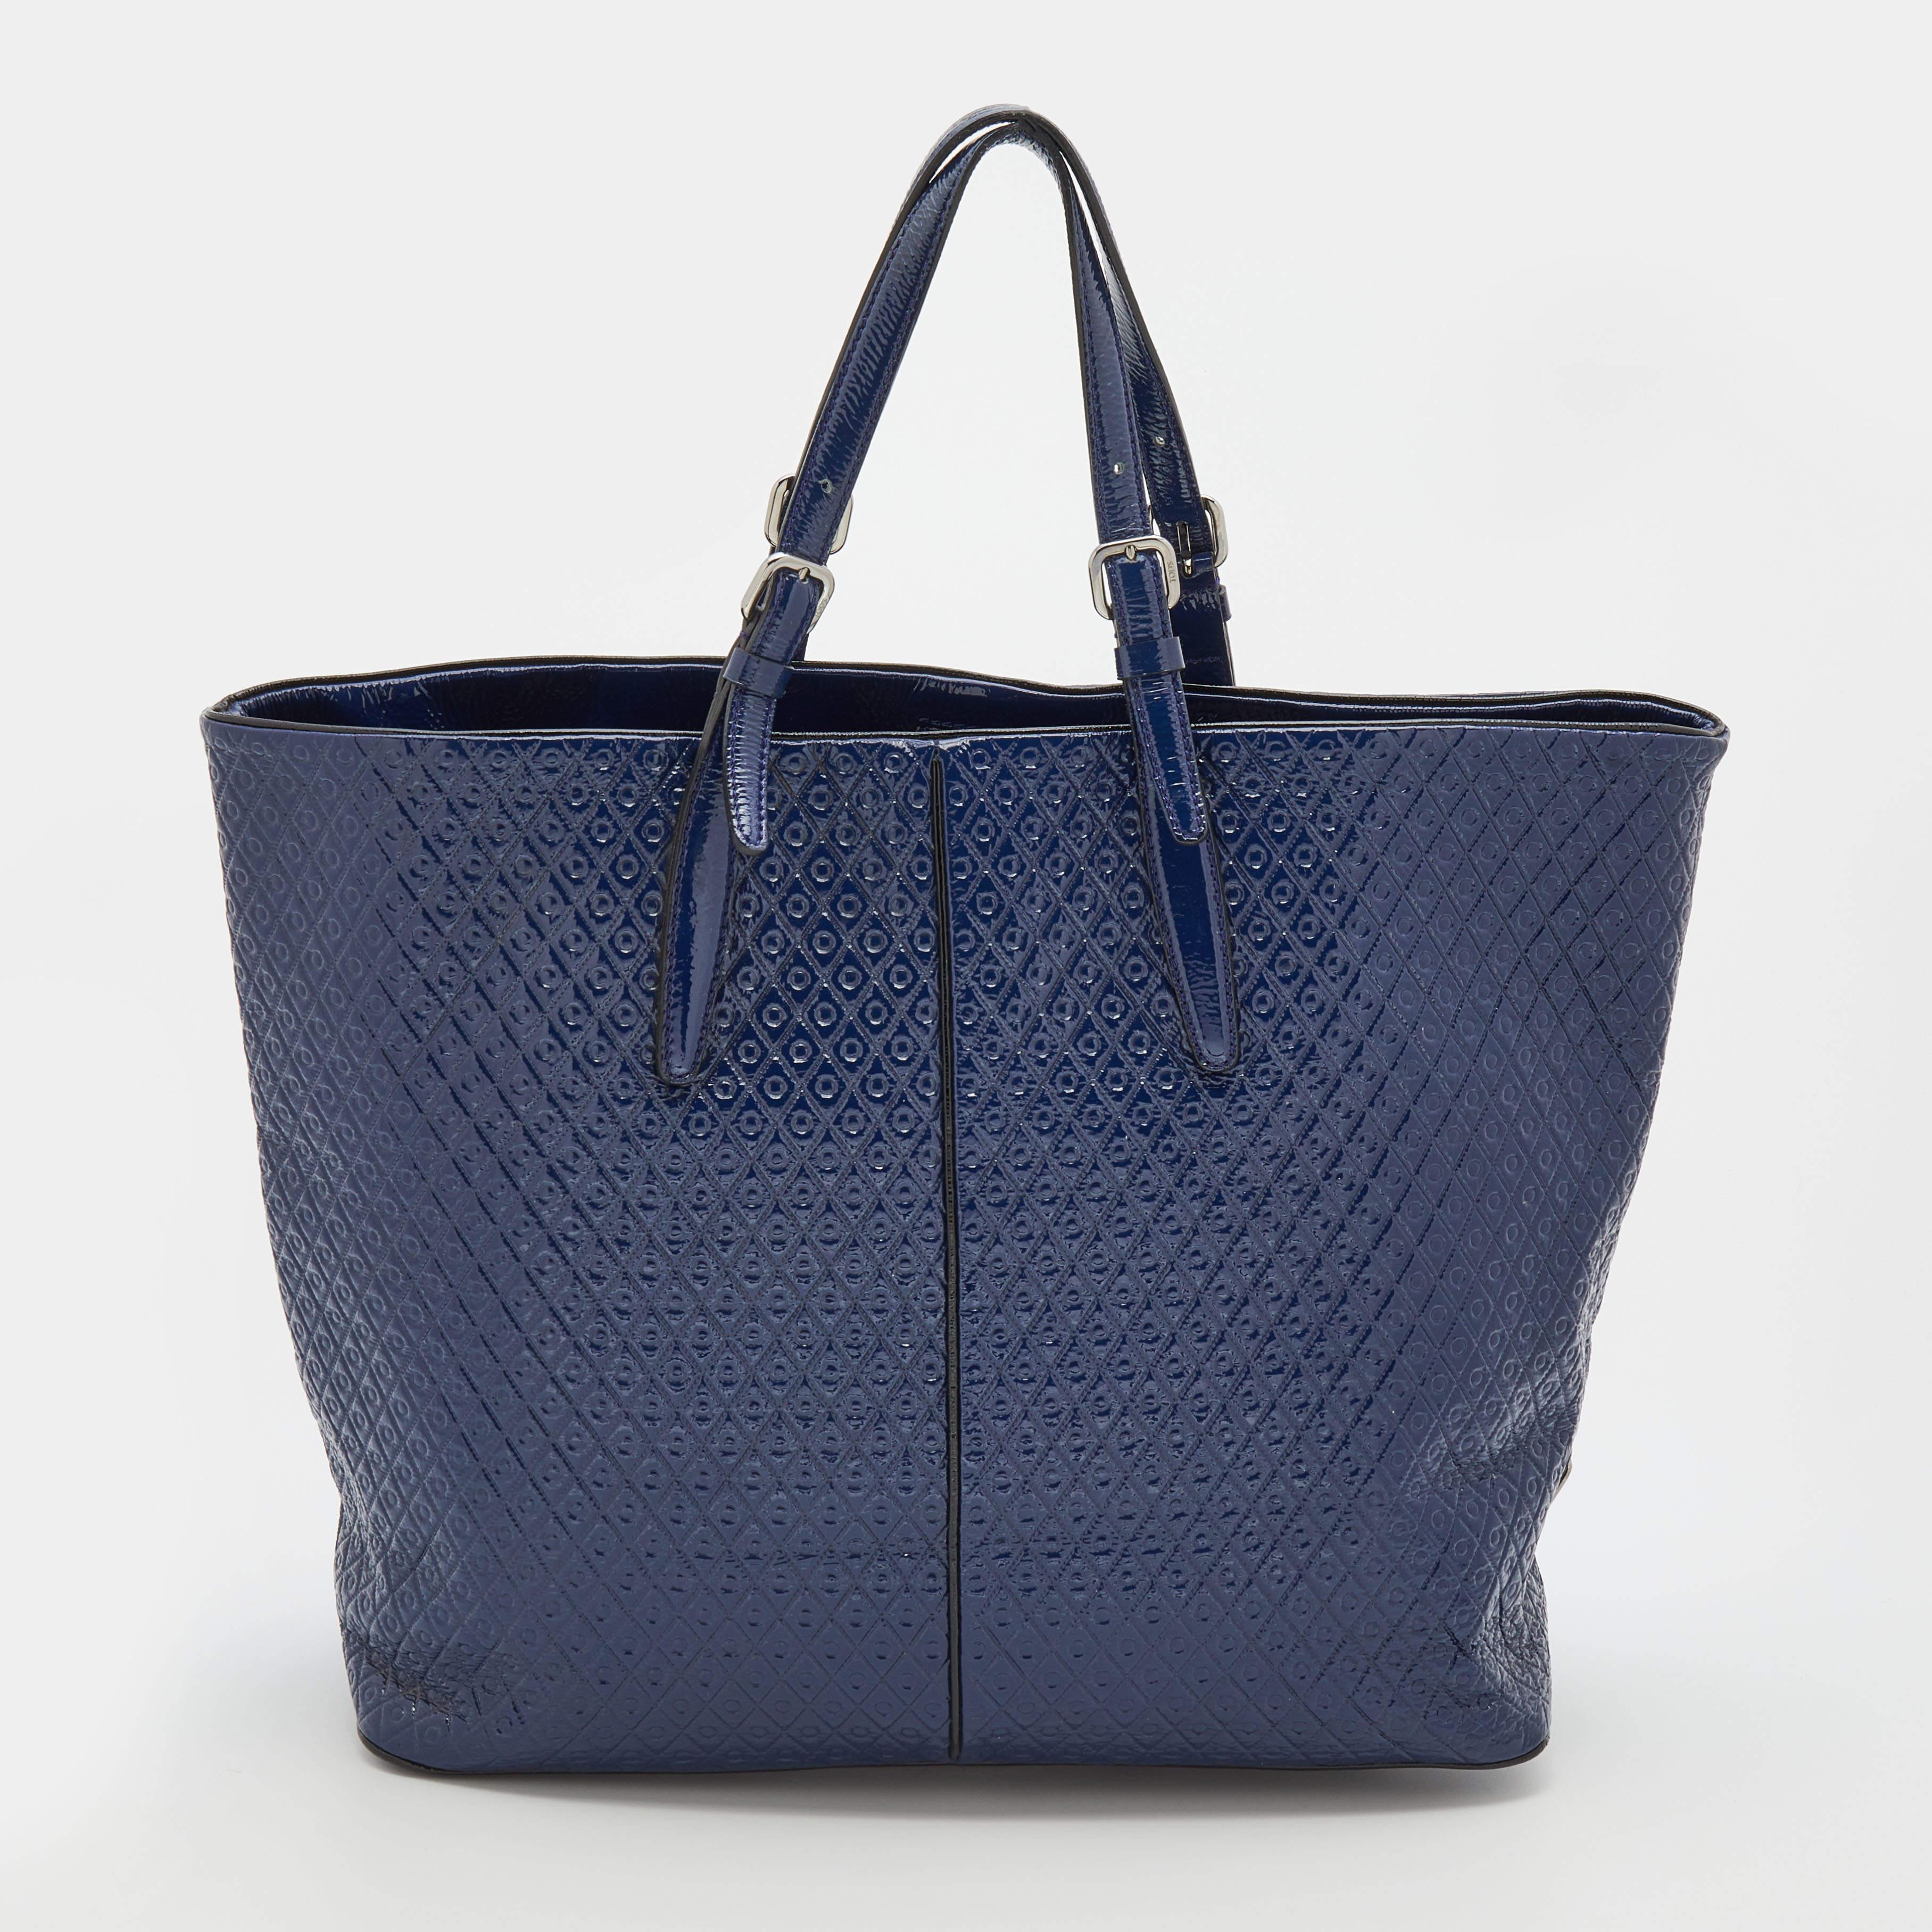 Tod's expertise in detailed craftsmanship is exemplified in this shopper tote. An accessory of utility, it is crafted from patent leather with classy elements and a structured shape. The brand detailing at the side lends the bag a recognizable